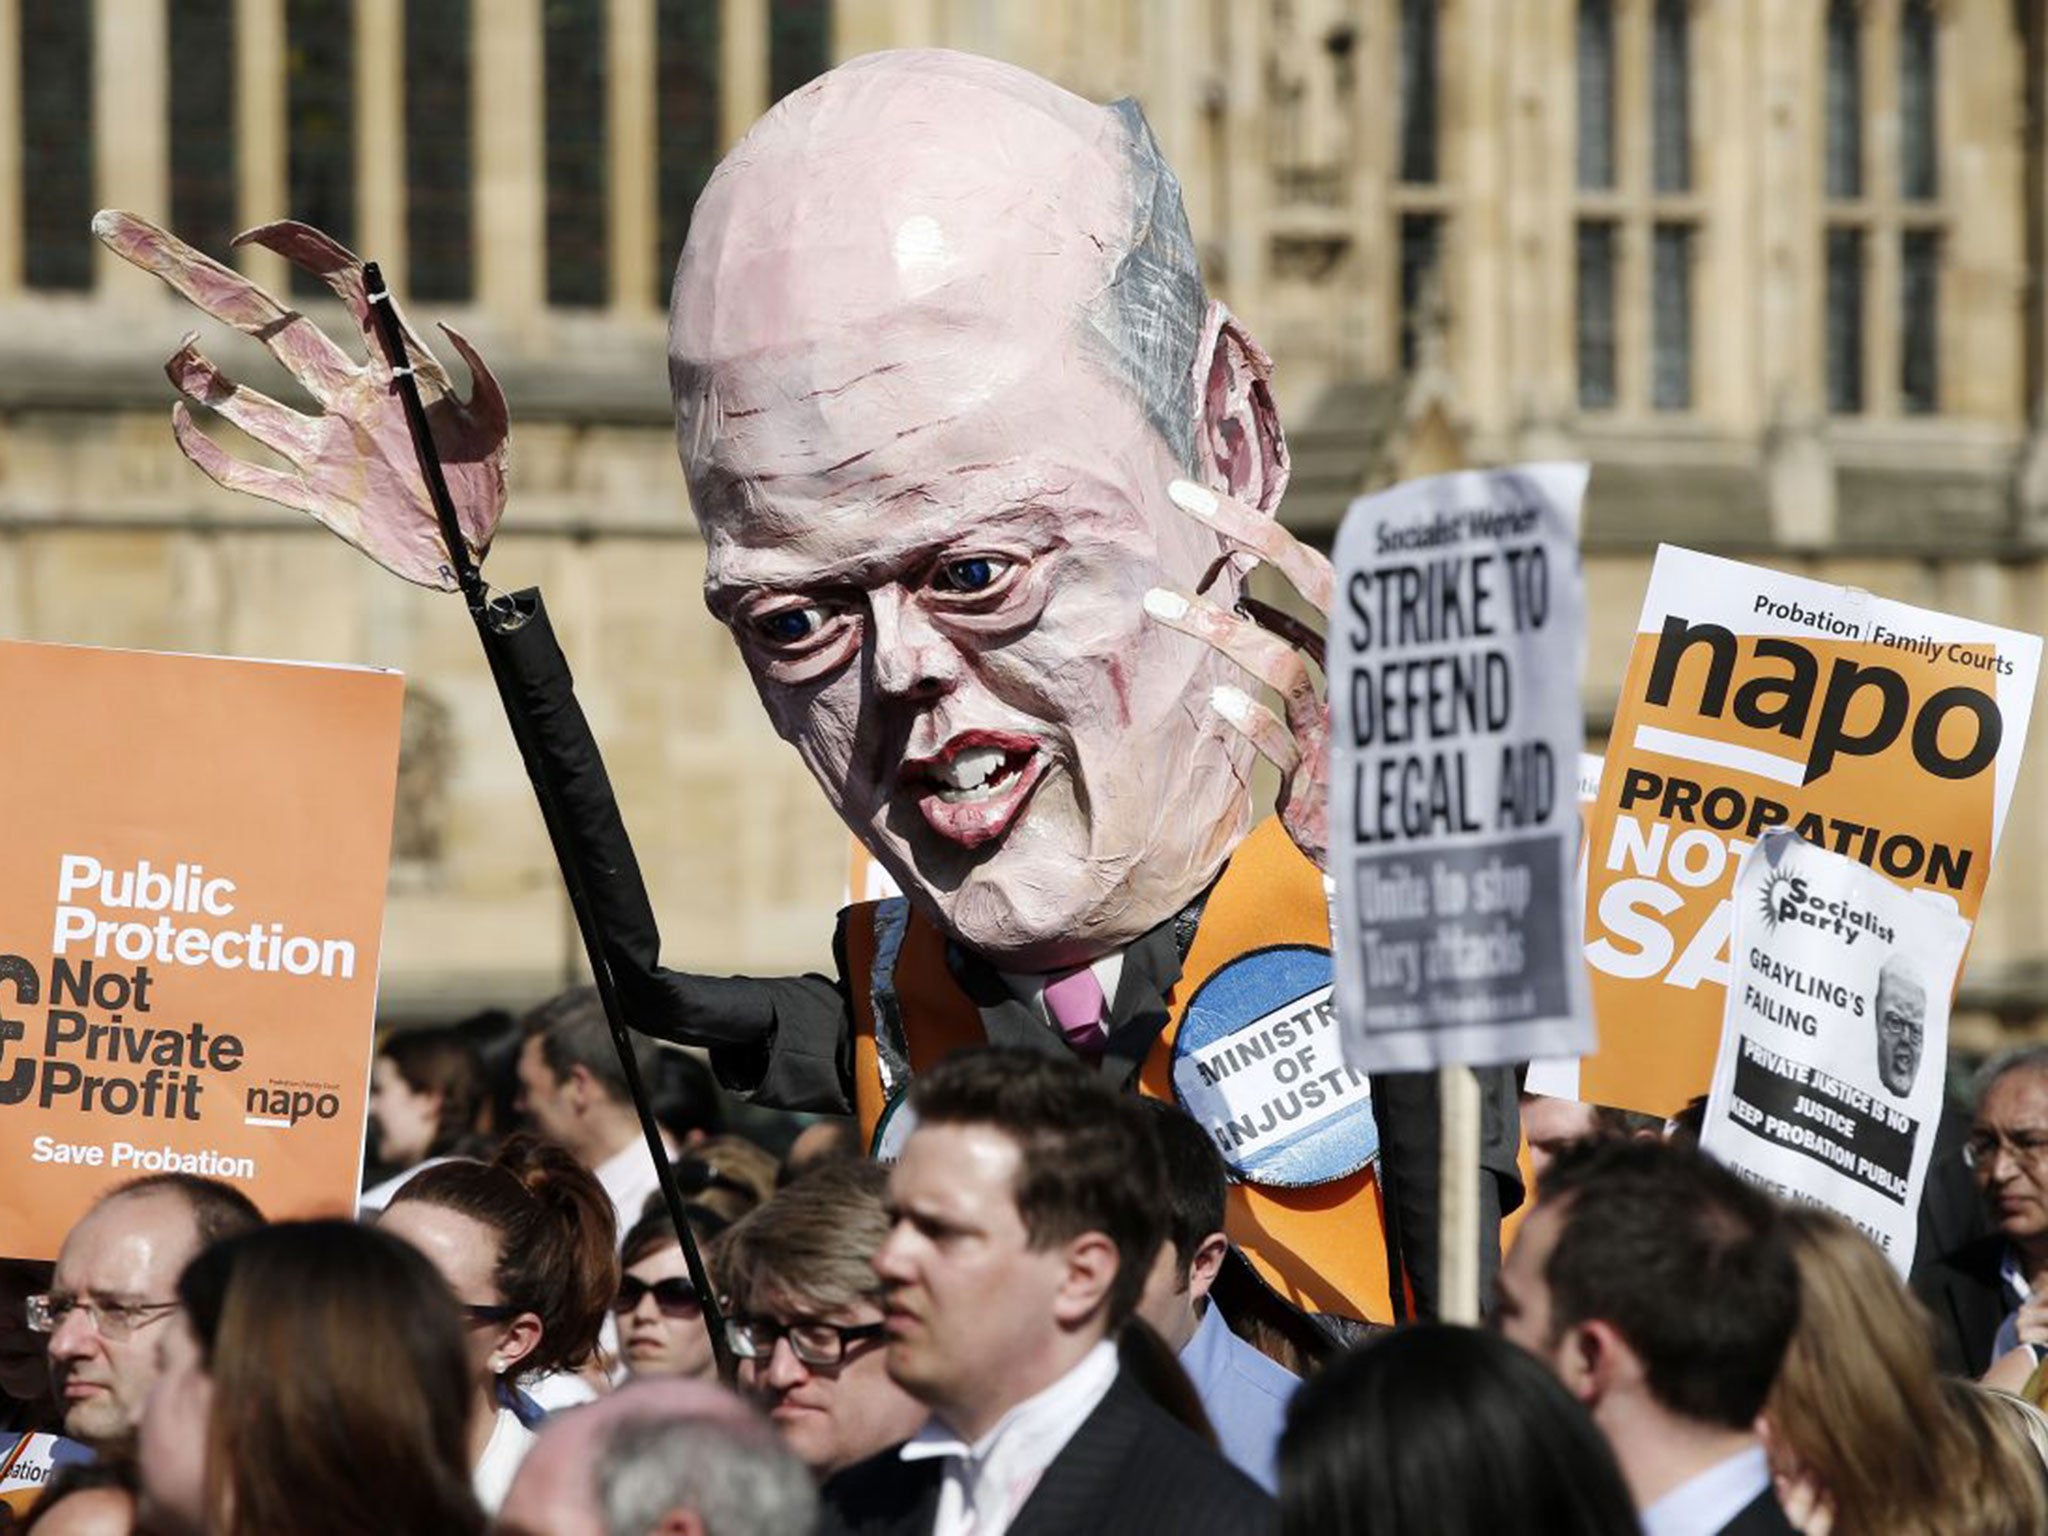 An effigy of Justice Secretary Chris Grayling is held up by National Association of Probation Officers protestors outside the Houses of Parliament